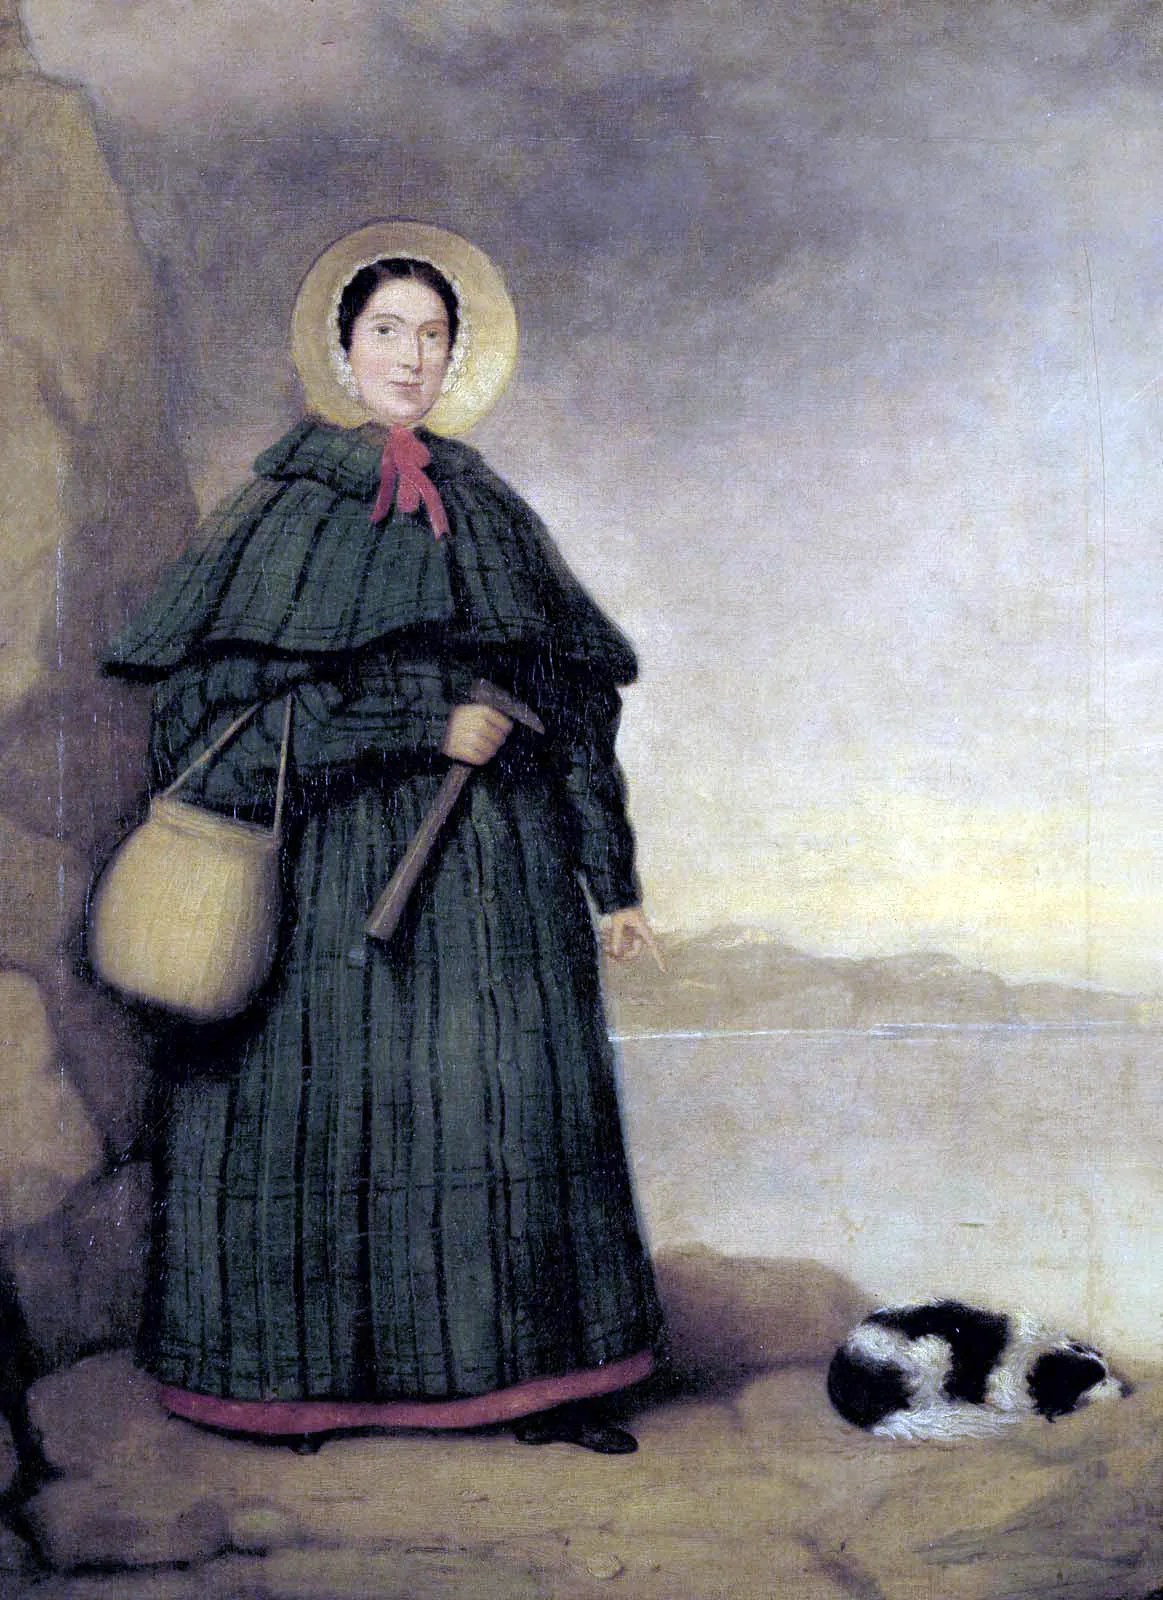 Illustration of Mary Anning